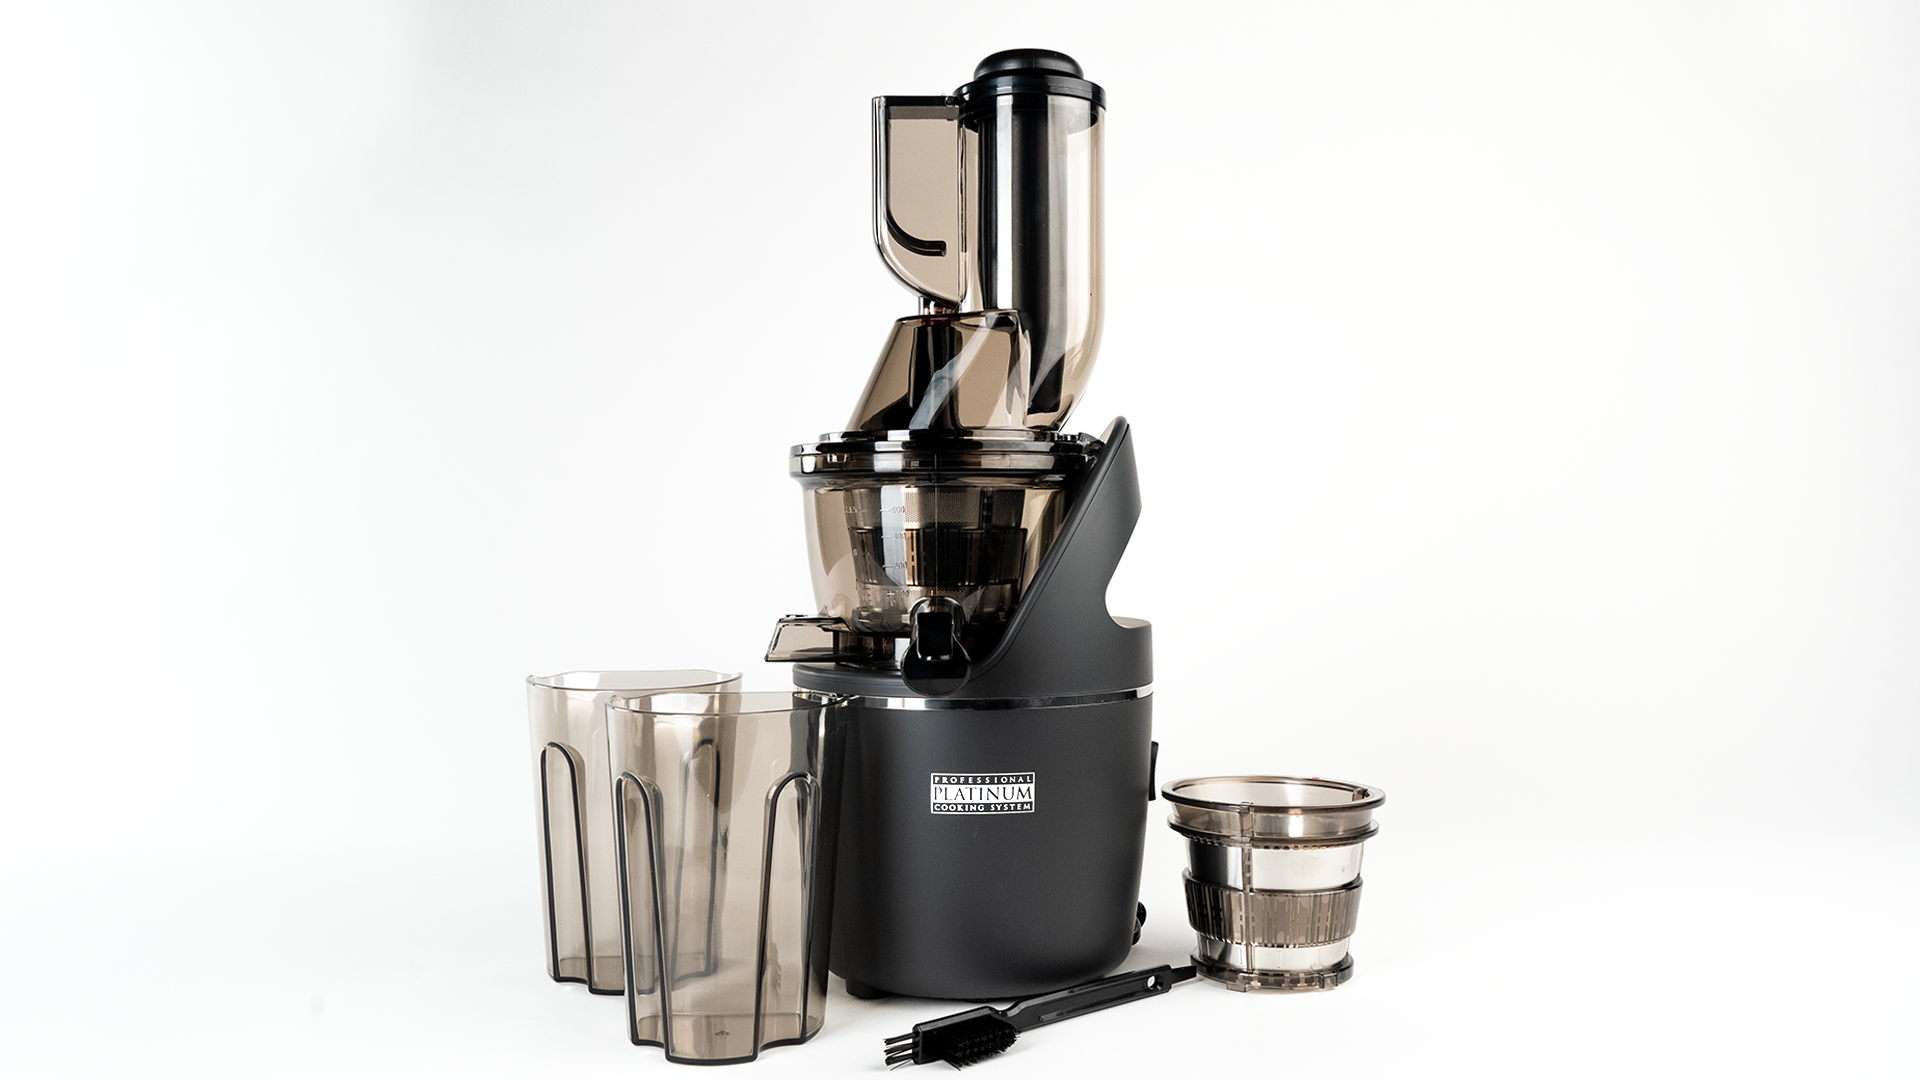 Load video: How to Assemble the Platinum Slow Juicer &amp; Sorbet System